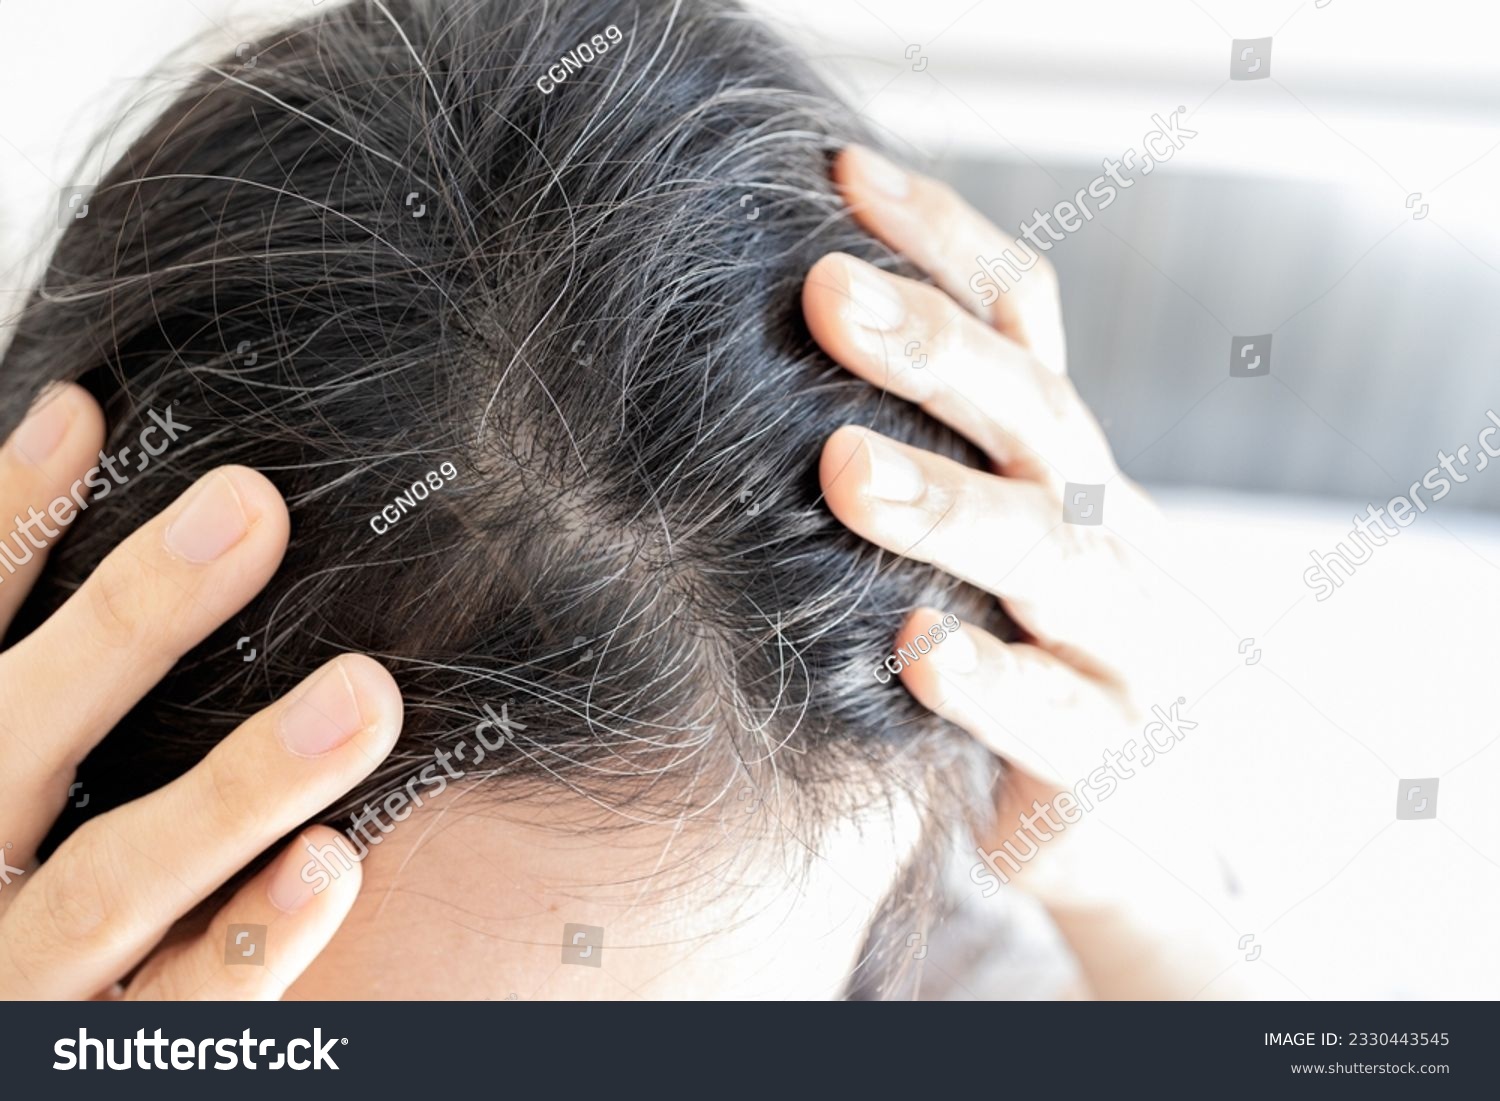 Premature gray hair problem,stressed asian young woman with hair loss,thyroid or autoimmune disorders,alopecia areata,deficiency of vitamins,concerned about graying hair,health care,medical concept #2330443545